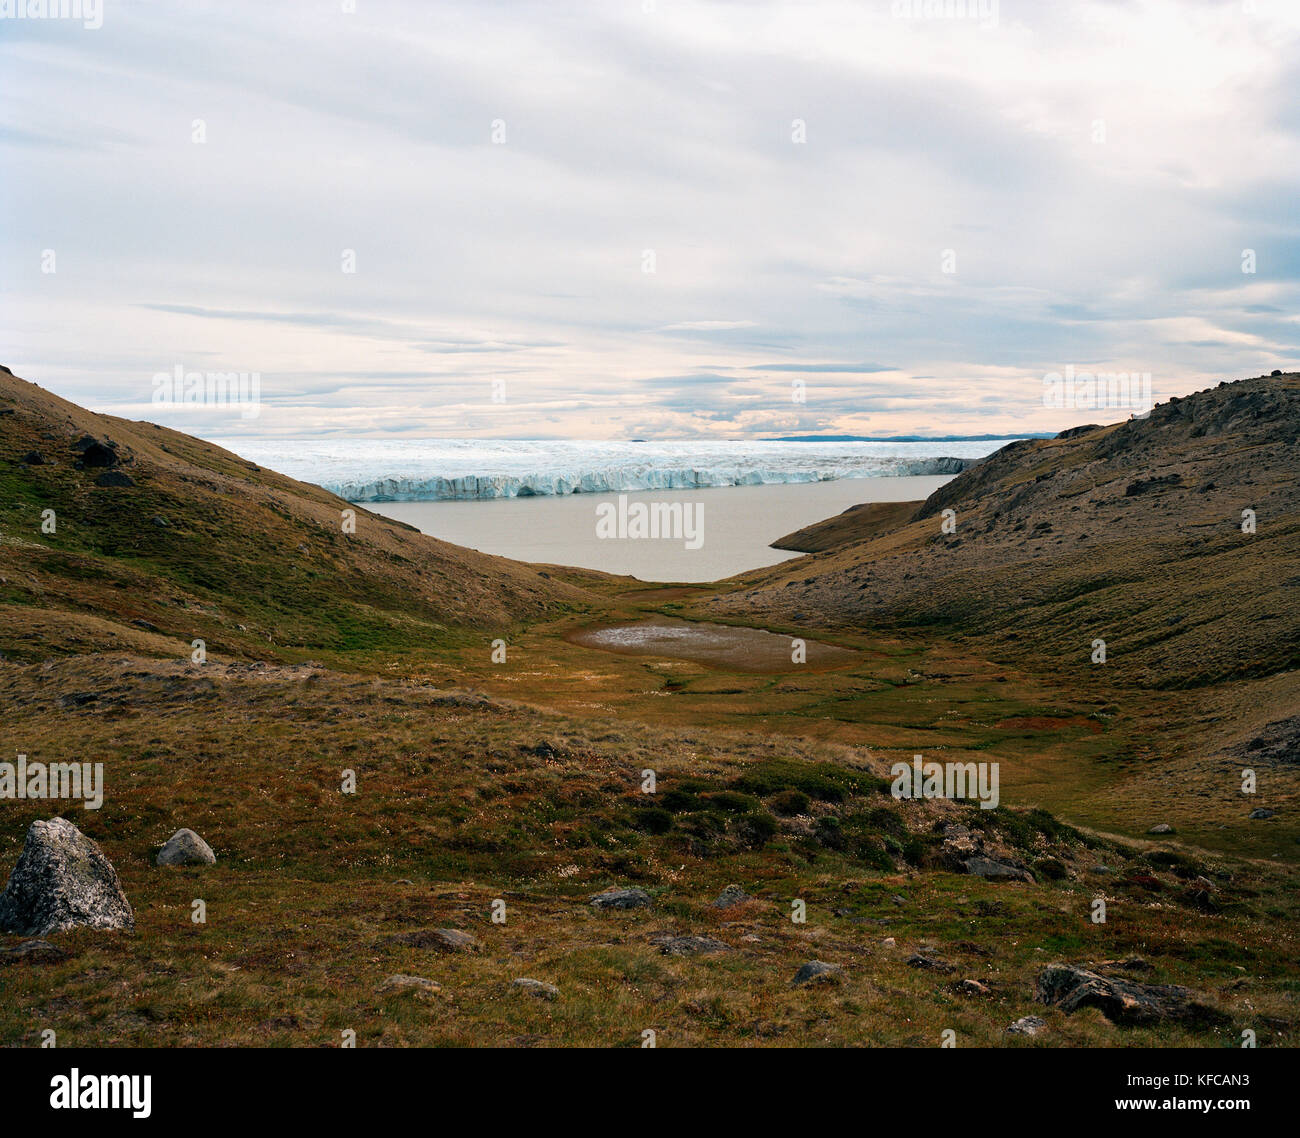 GREENLAND, Kangerlussuaq, Russel's Glacier in the background, landscape with sea against sky Stock Photo